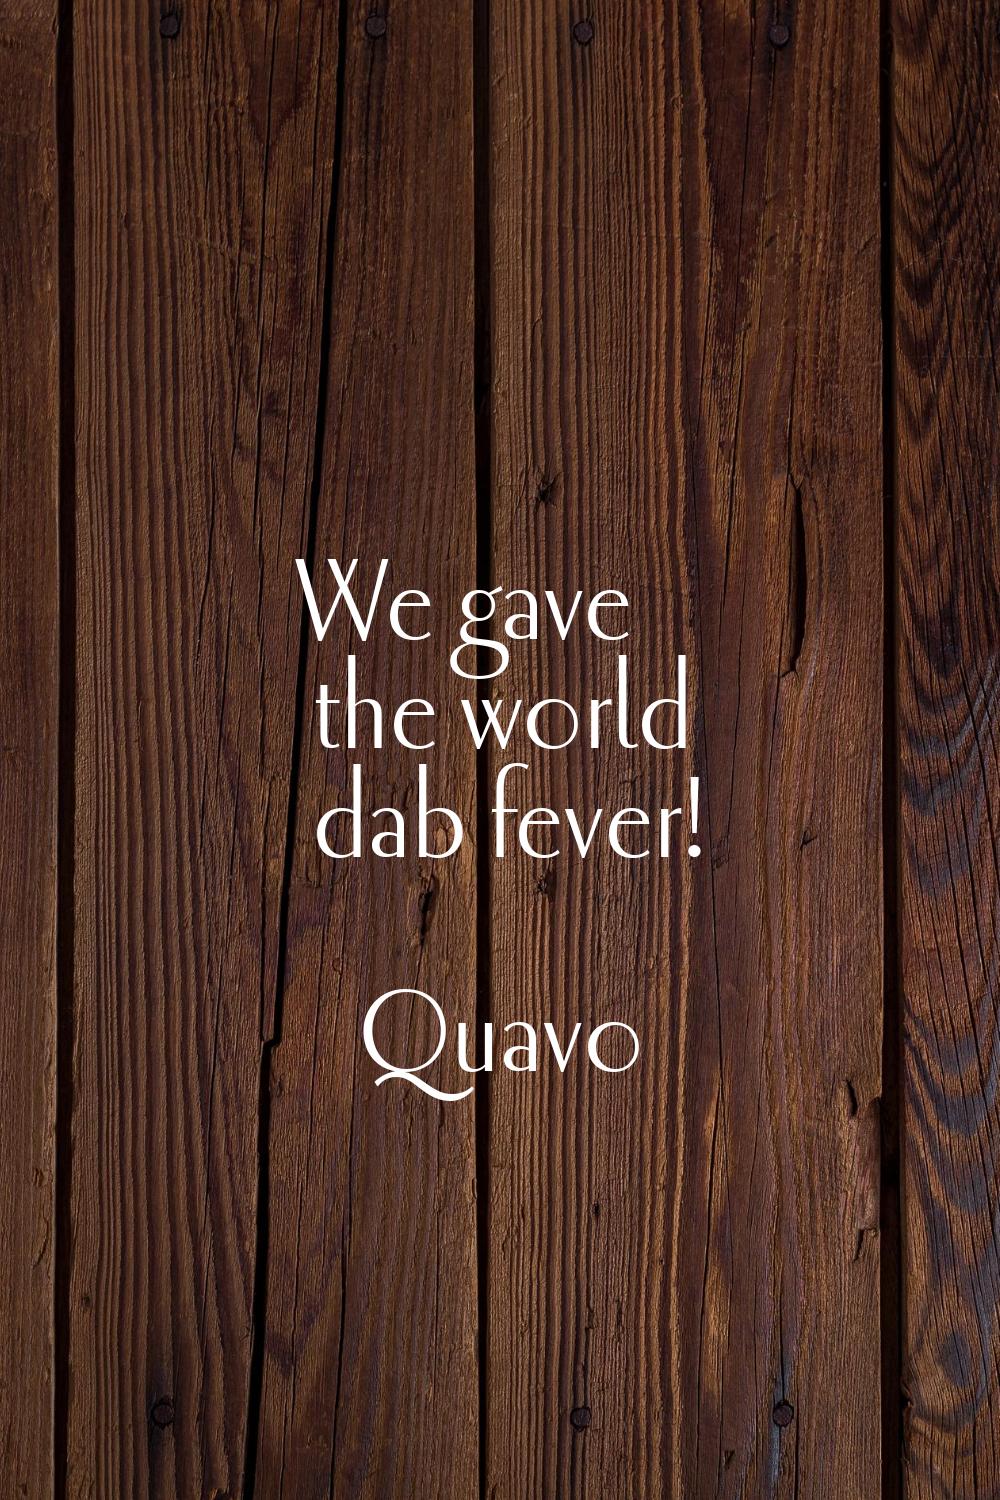 We gave the world dab fever!